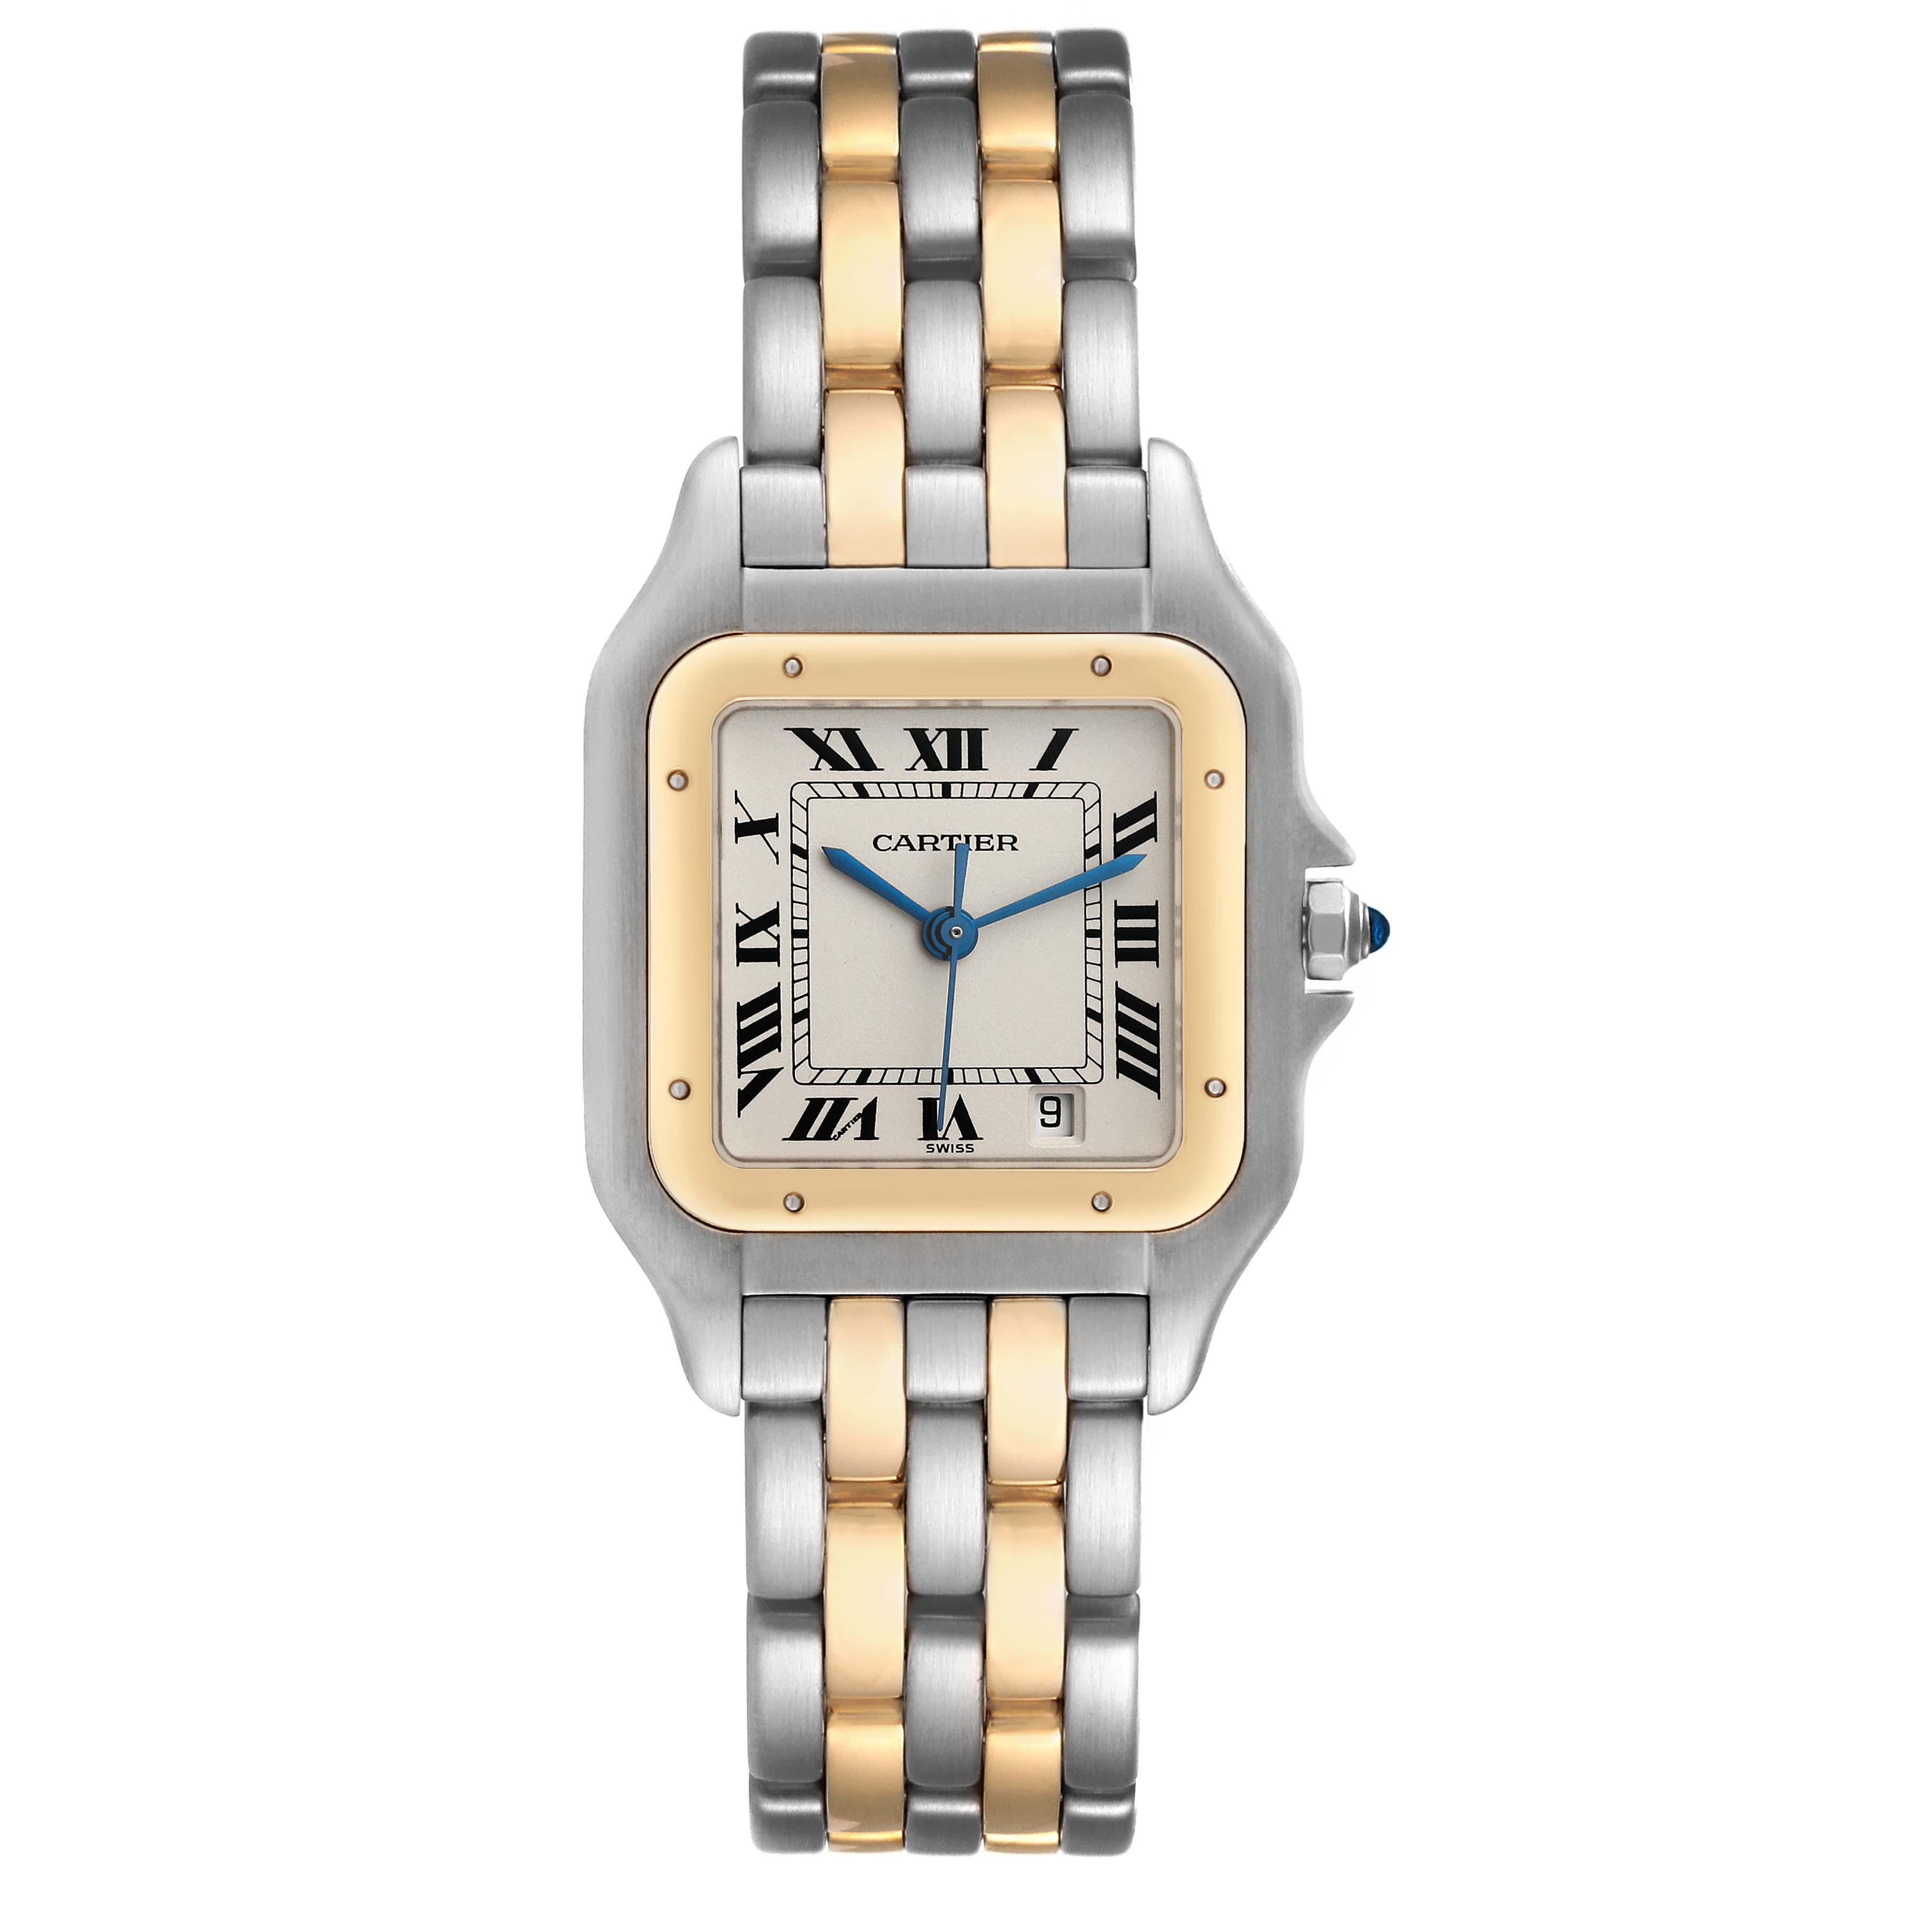 Cartier Panthere Large Steel Yellow Gold Two Row Ladies Watch W25028B6 Box Papers. Quartz movement. Stainless steel and 18k yellow gold case 26.0 x 36.0 mm. Octagonal crown set with the blue spinel cabochon. . Scratch resistant sapphire crystal.